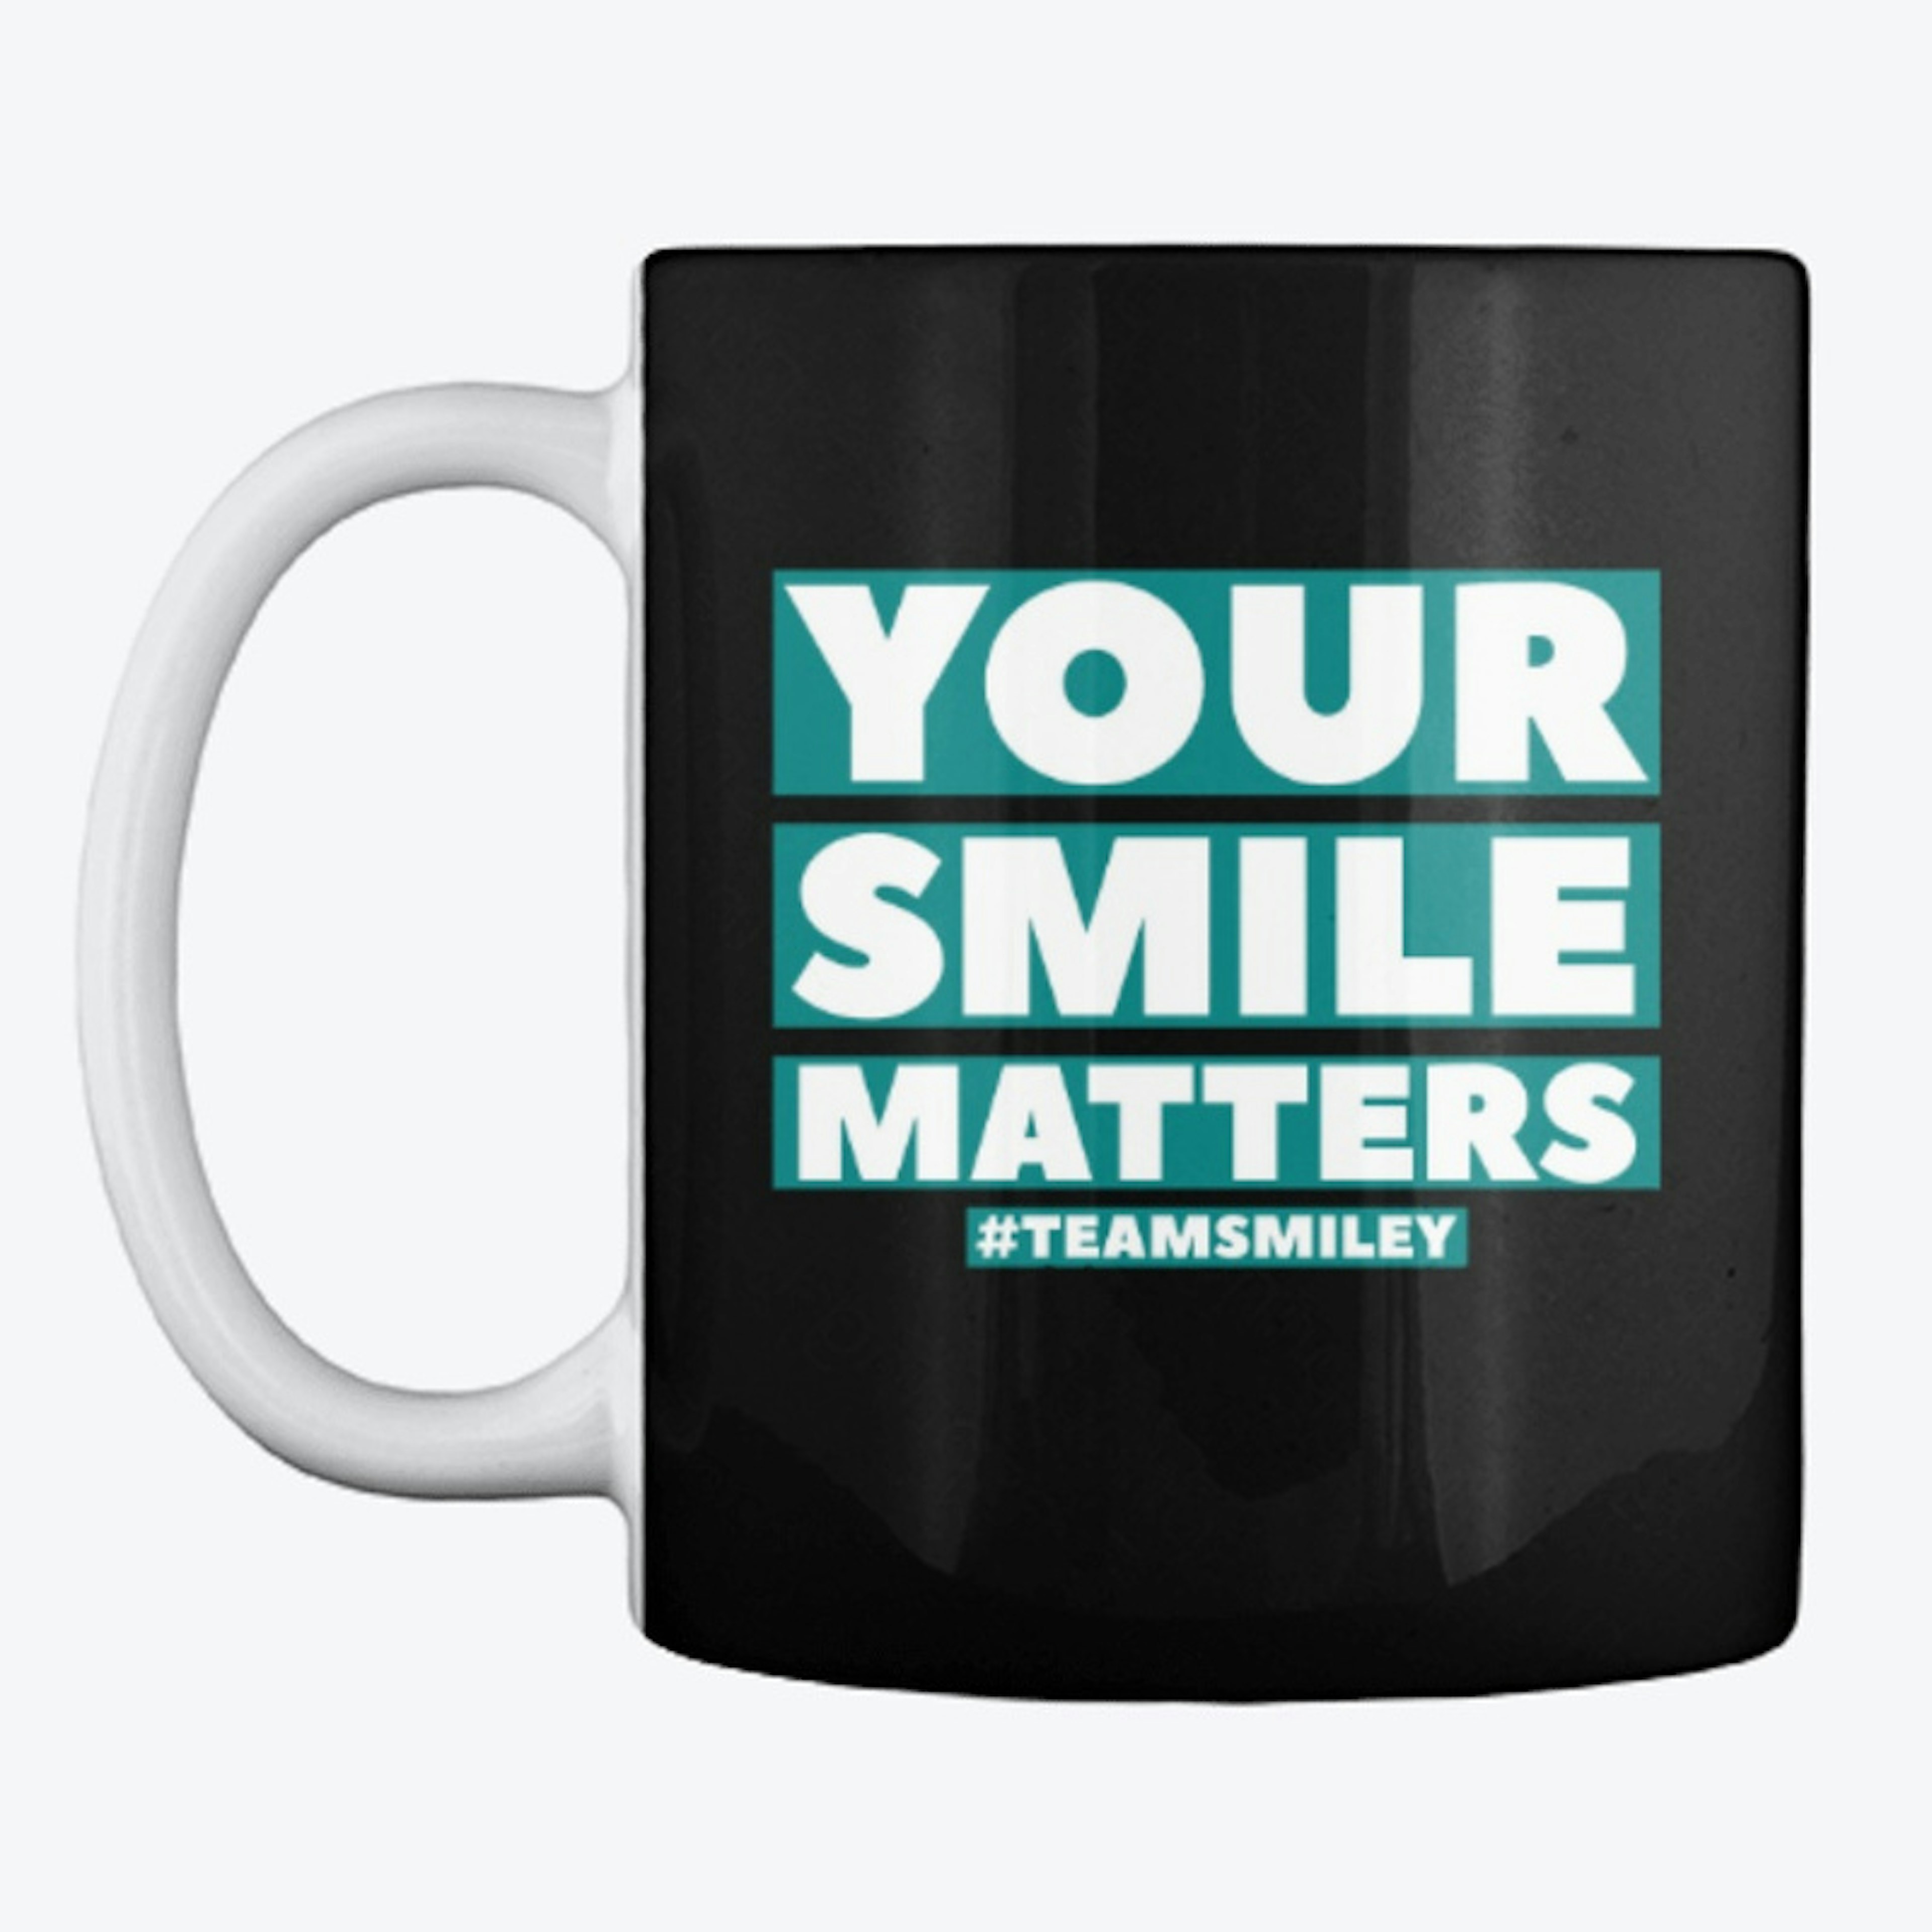 Your Smile Matters Collection!